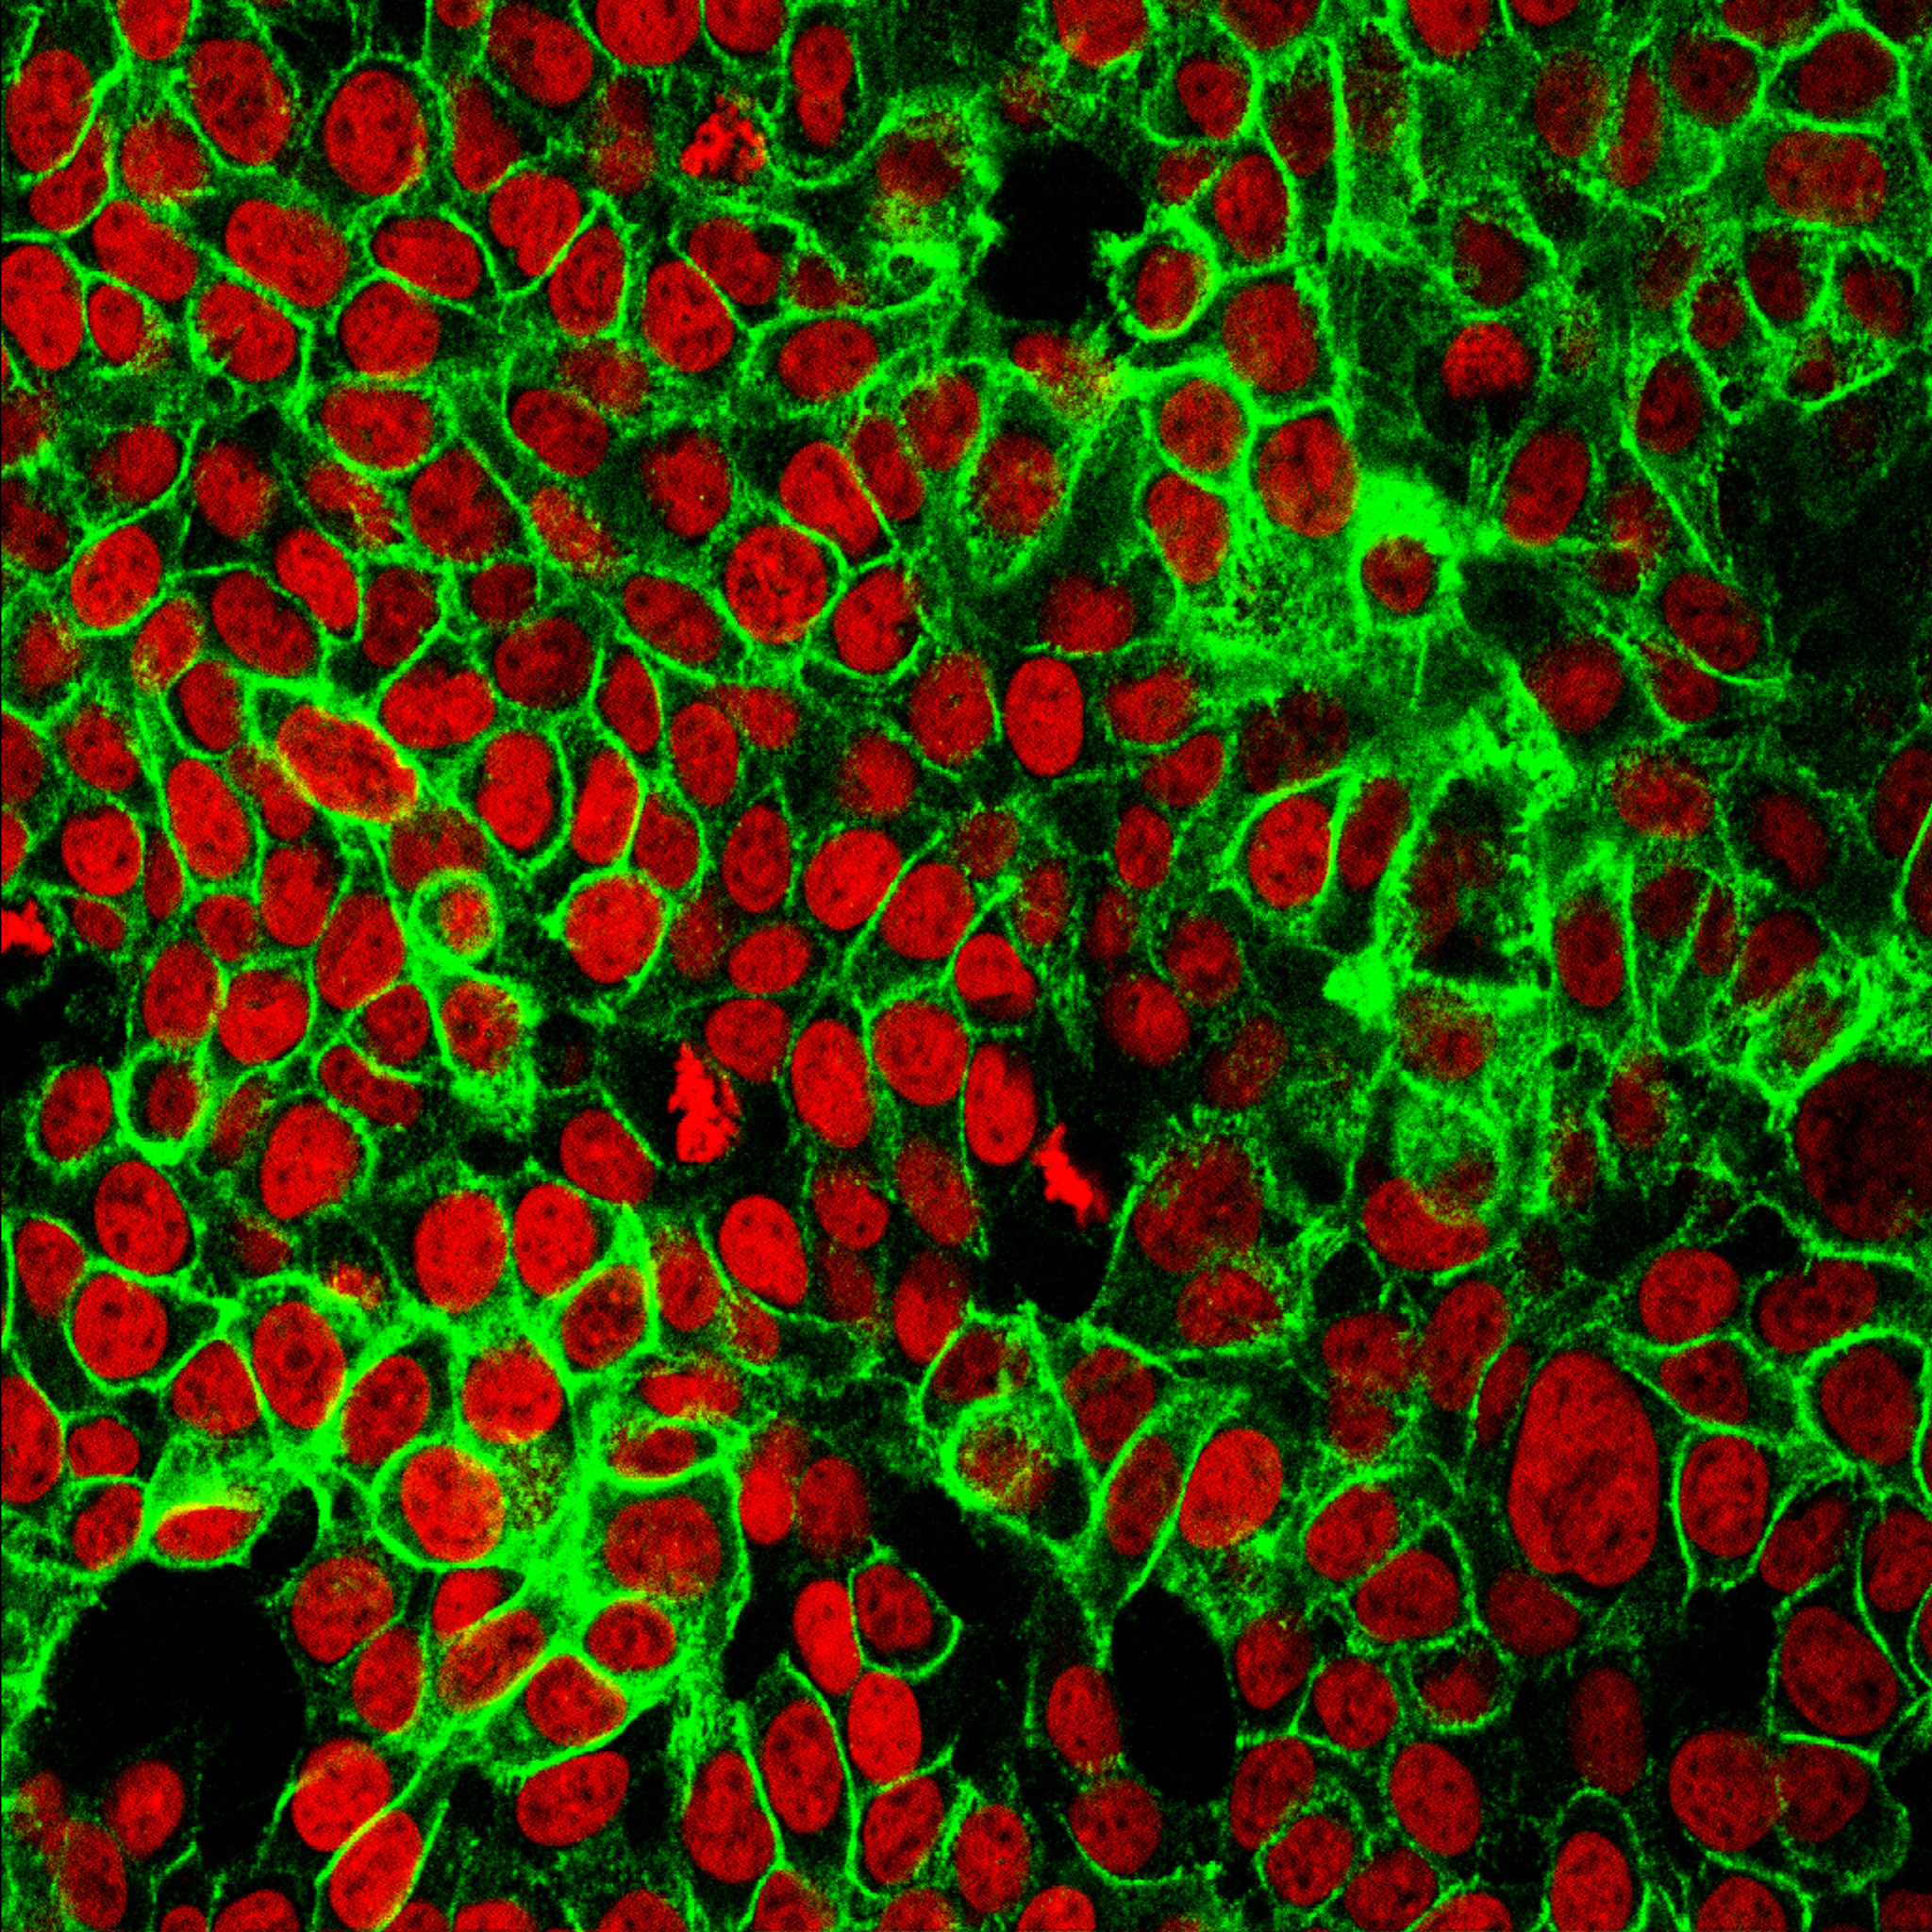 red and green stained photograph of human colon cancer cells